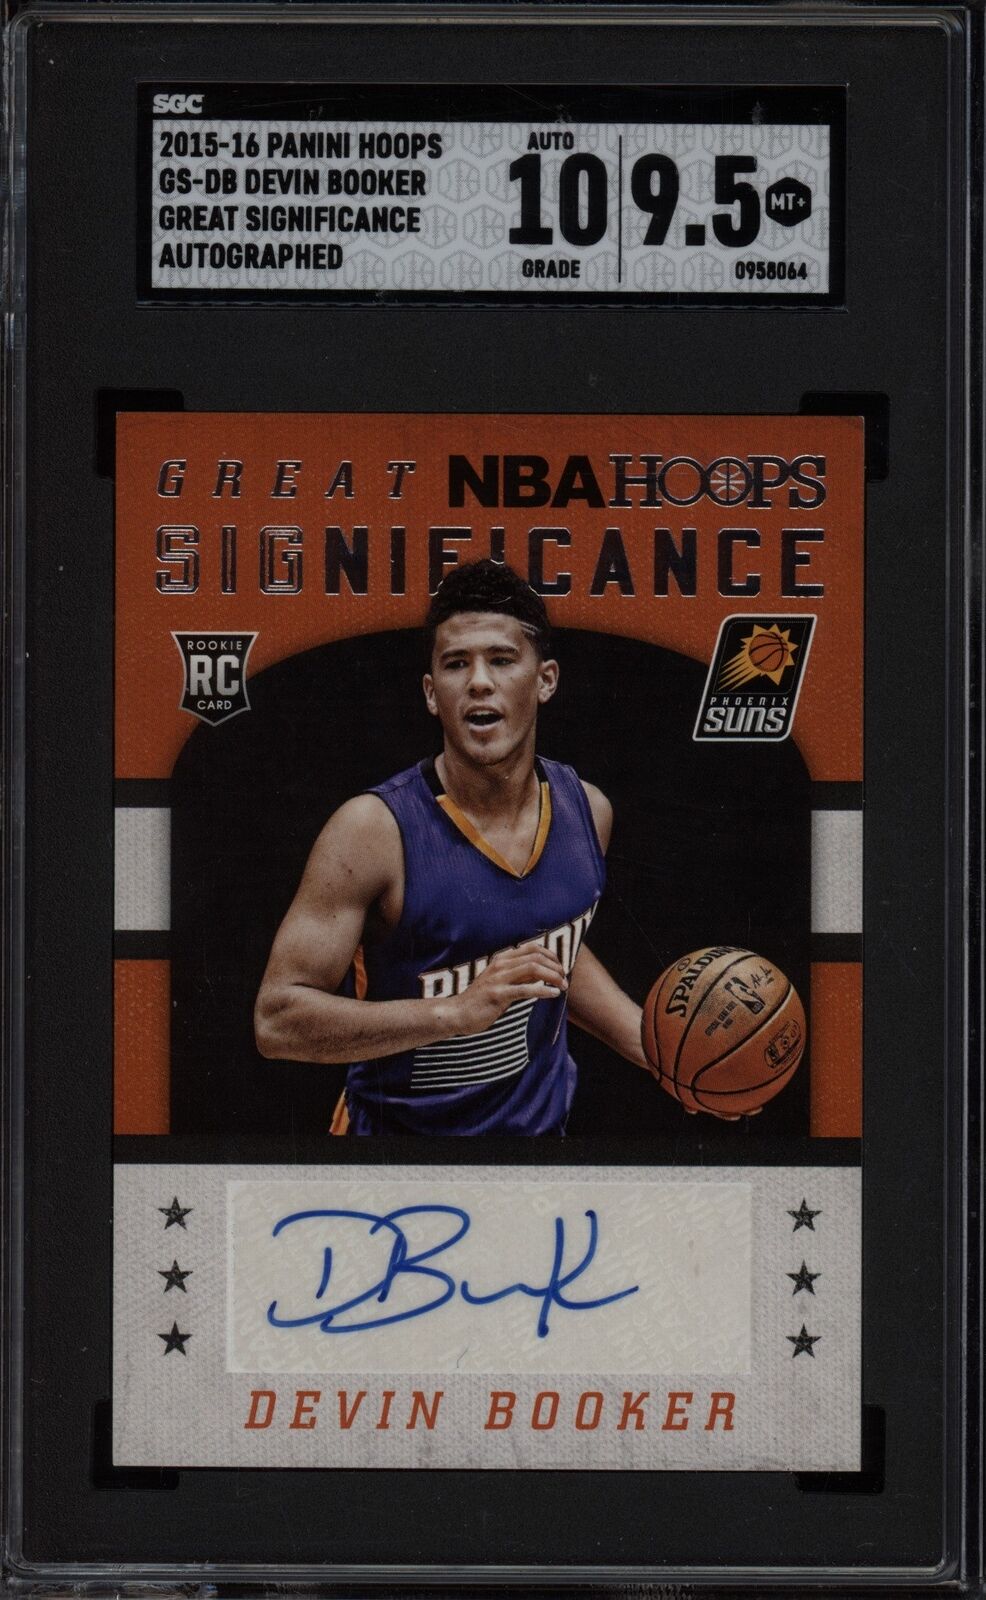 Devin Booker 2015-16 Panini Hoops Great Significance Auto RC SGC 9.5/10